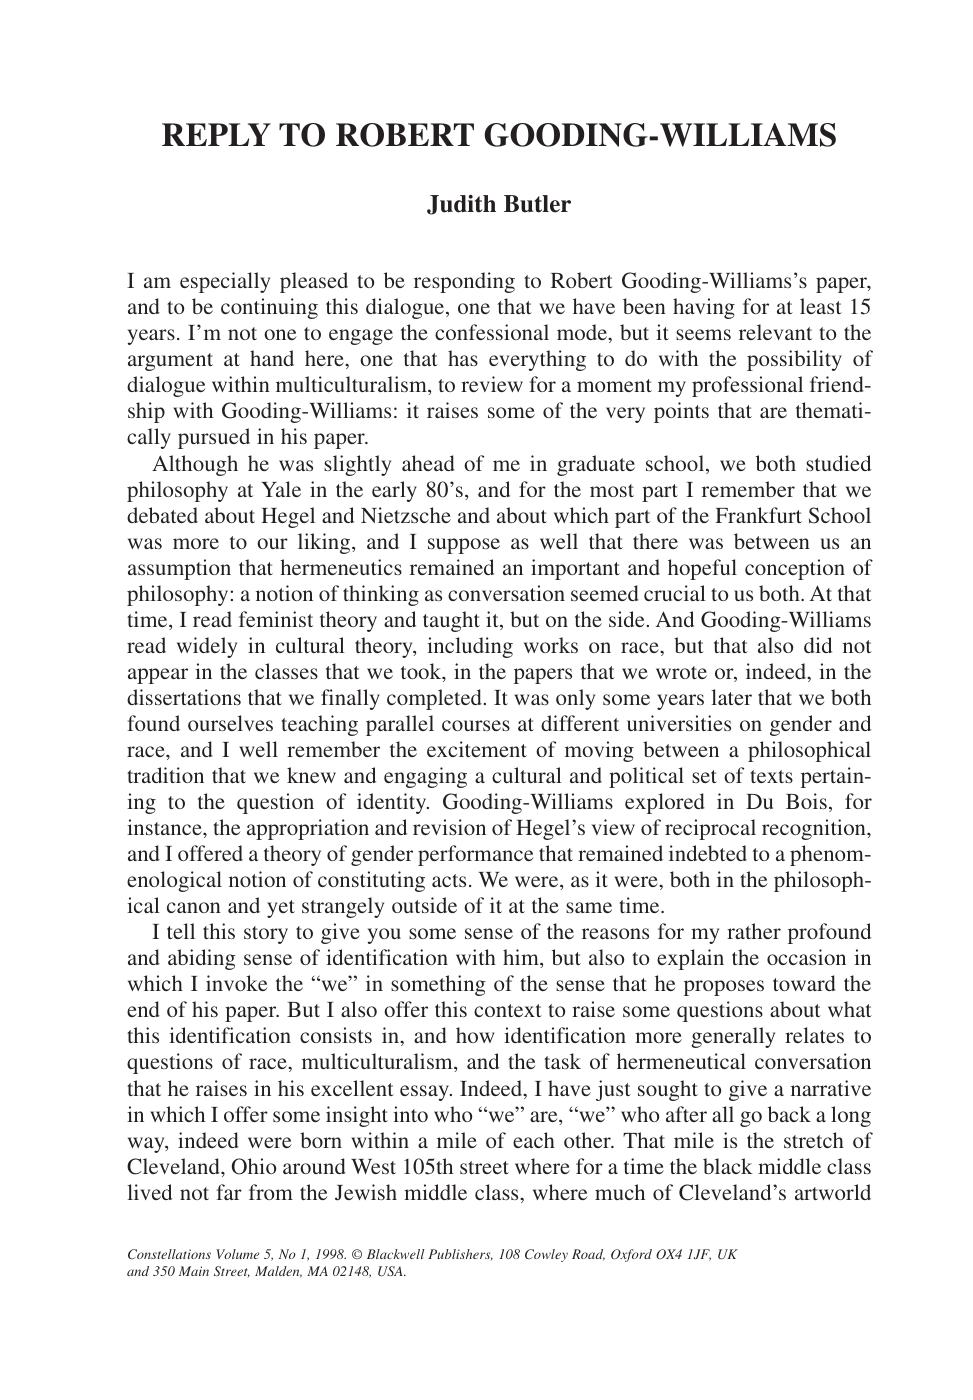 Reply to Robert Gooding-Williams [Essay]